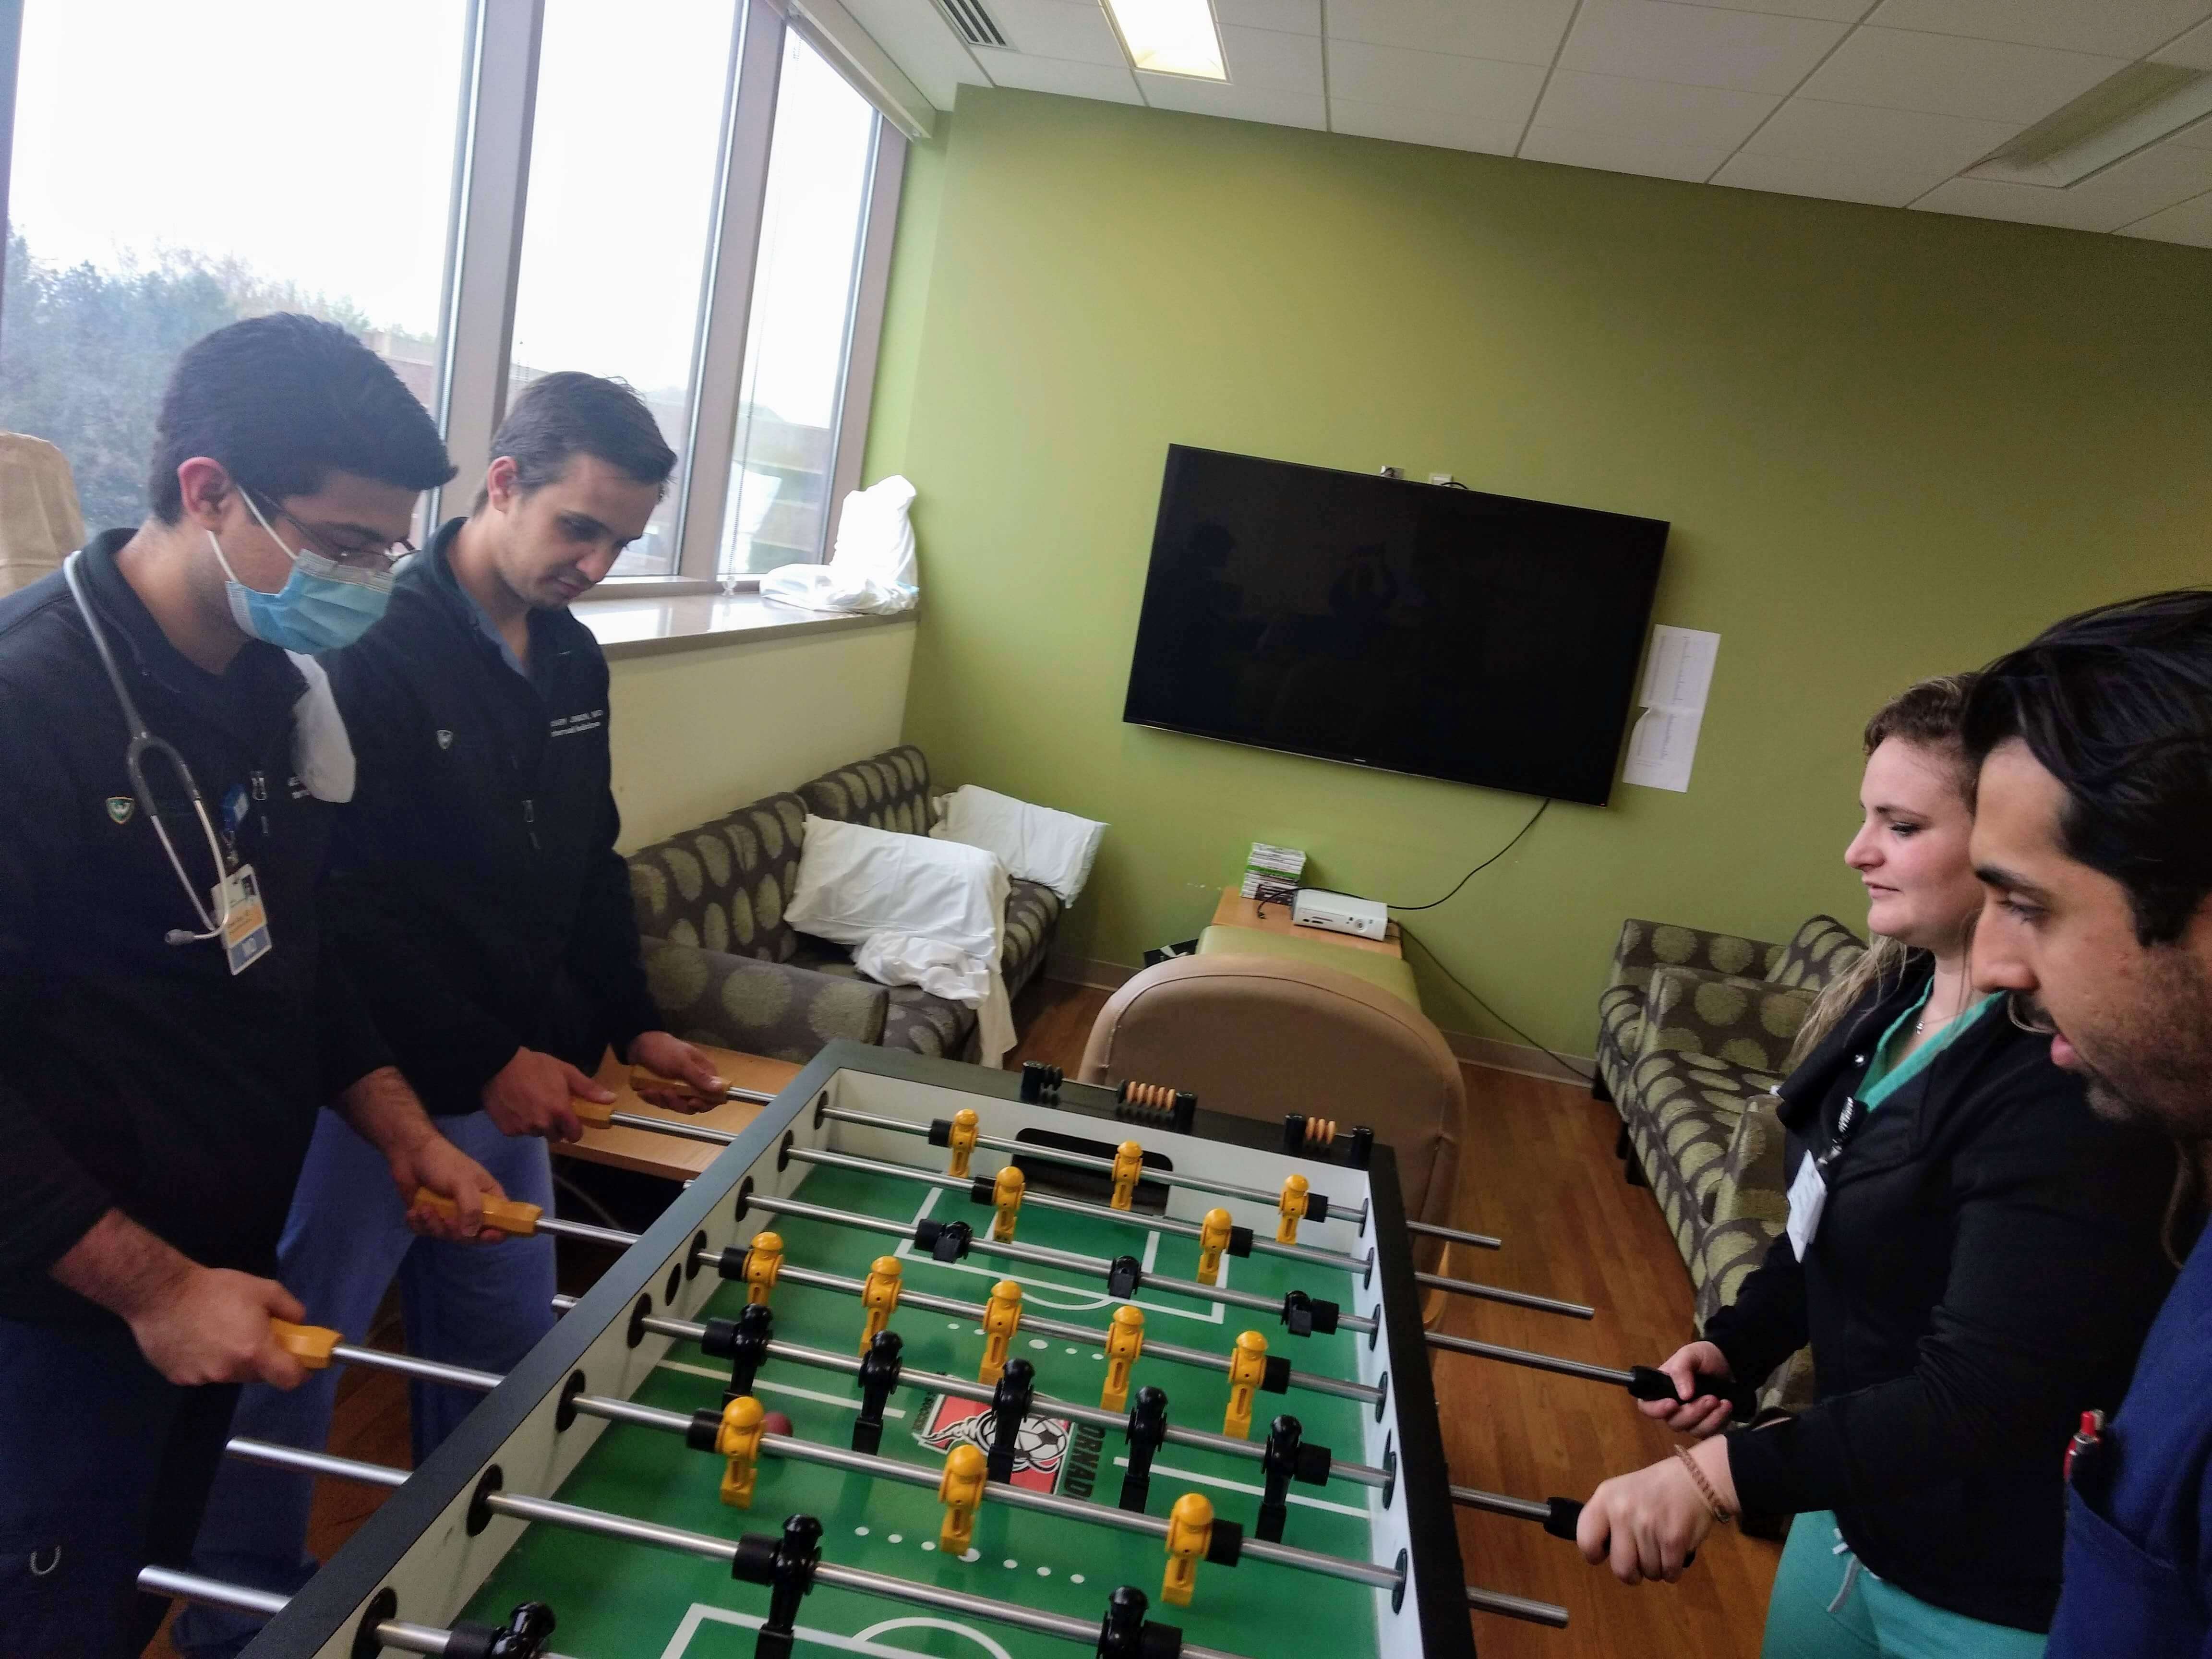 4 residents, 1 wearing a mask playing foosball together